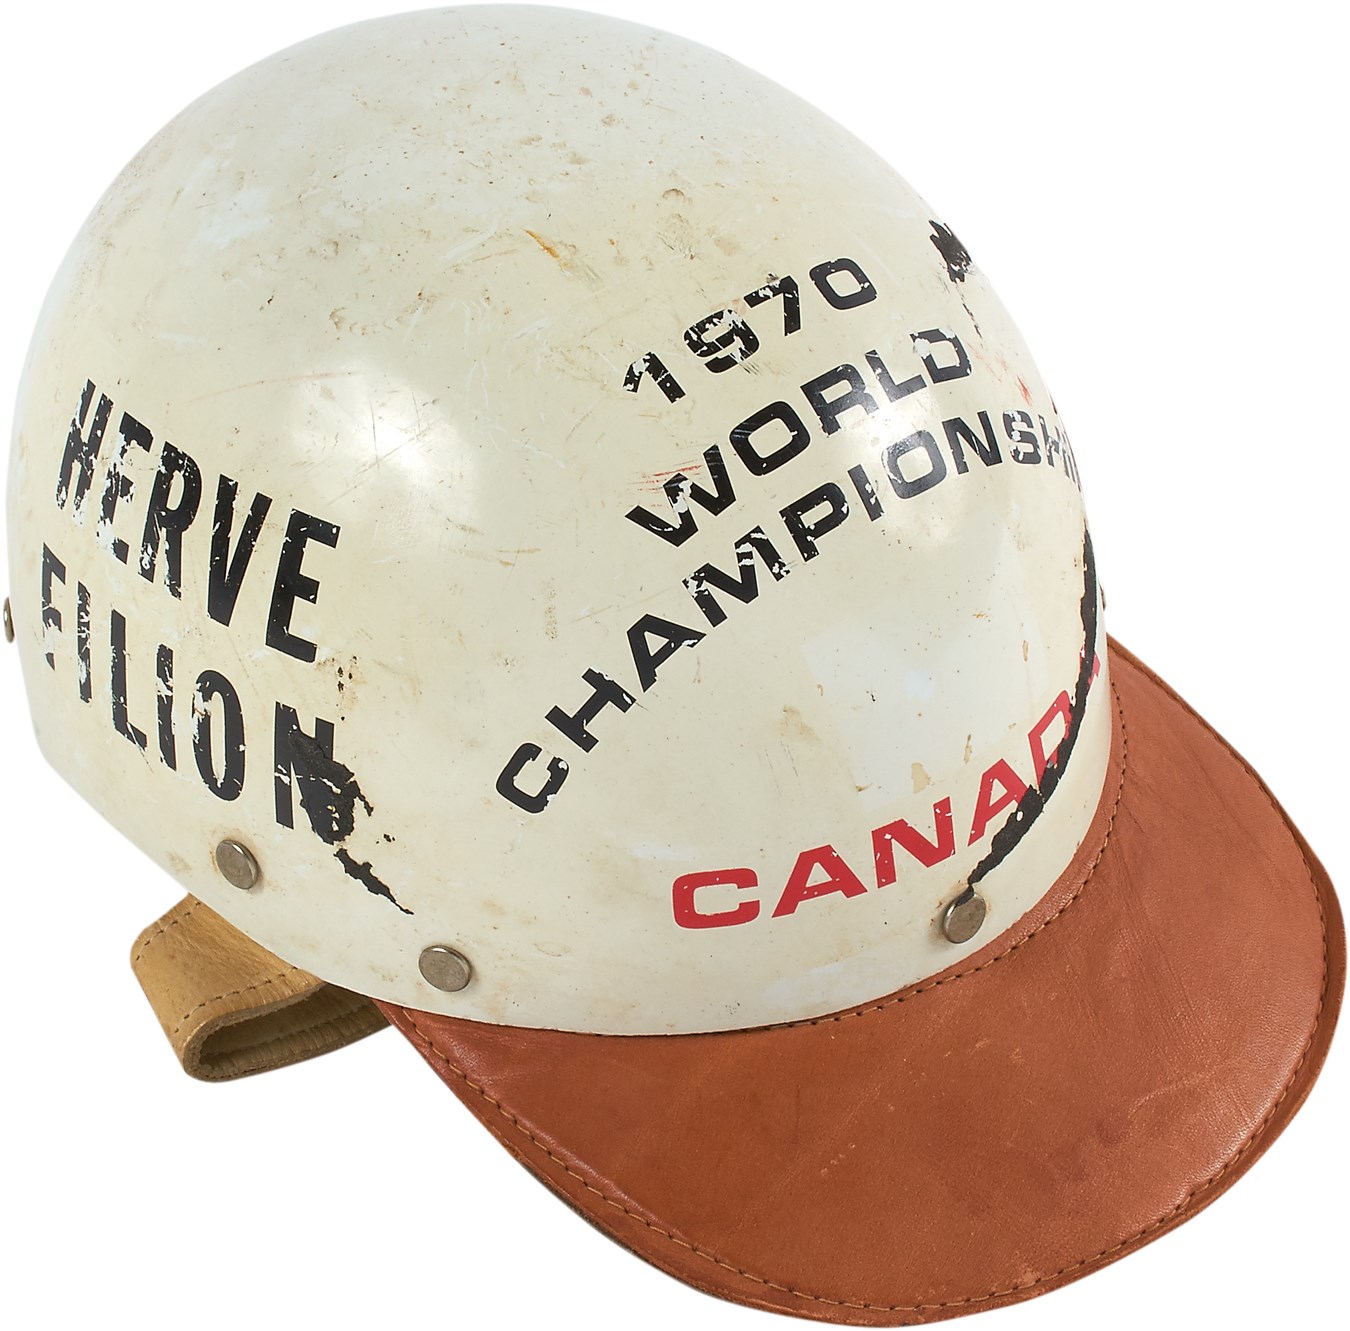 Horse Racing - Historic 1970 Herve Filion Race Worn Helmet from Inaugural World Driving Championship